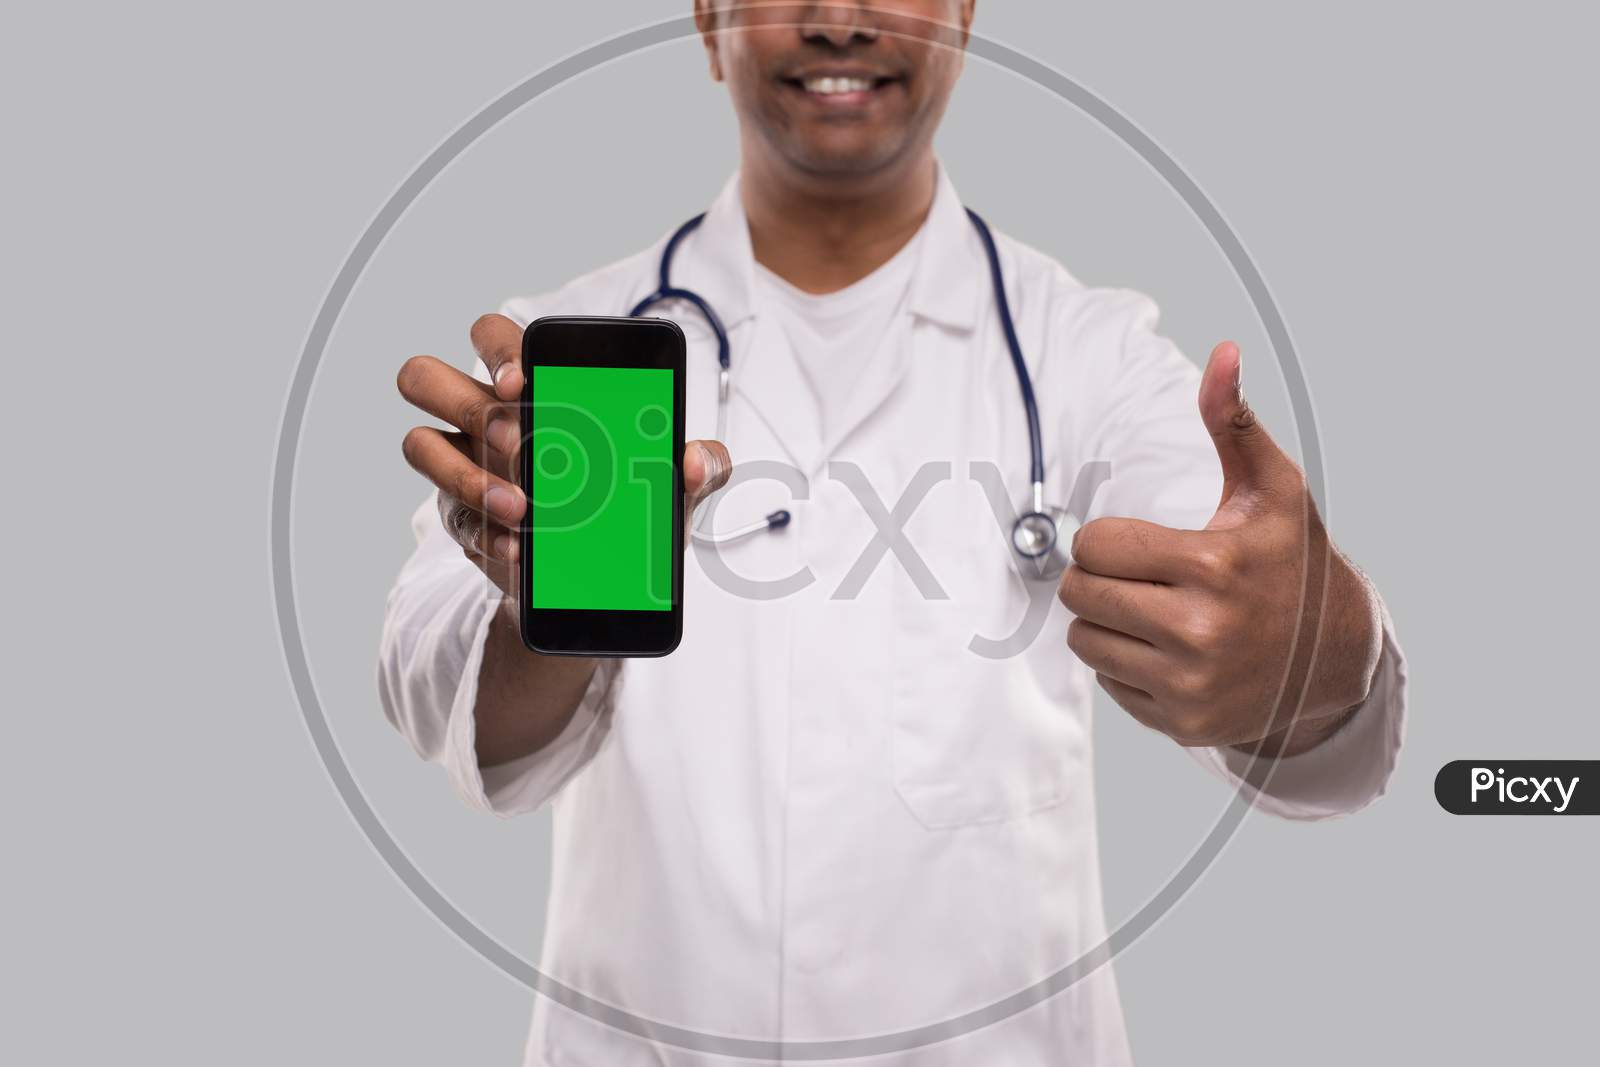 Doctor Holding Phone Showing Thumb Up Close Up Isolated. Indian Man Doctor Technology Medicine At Home. Phone Green Screen.